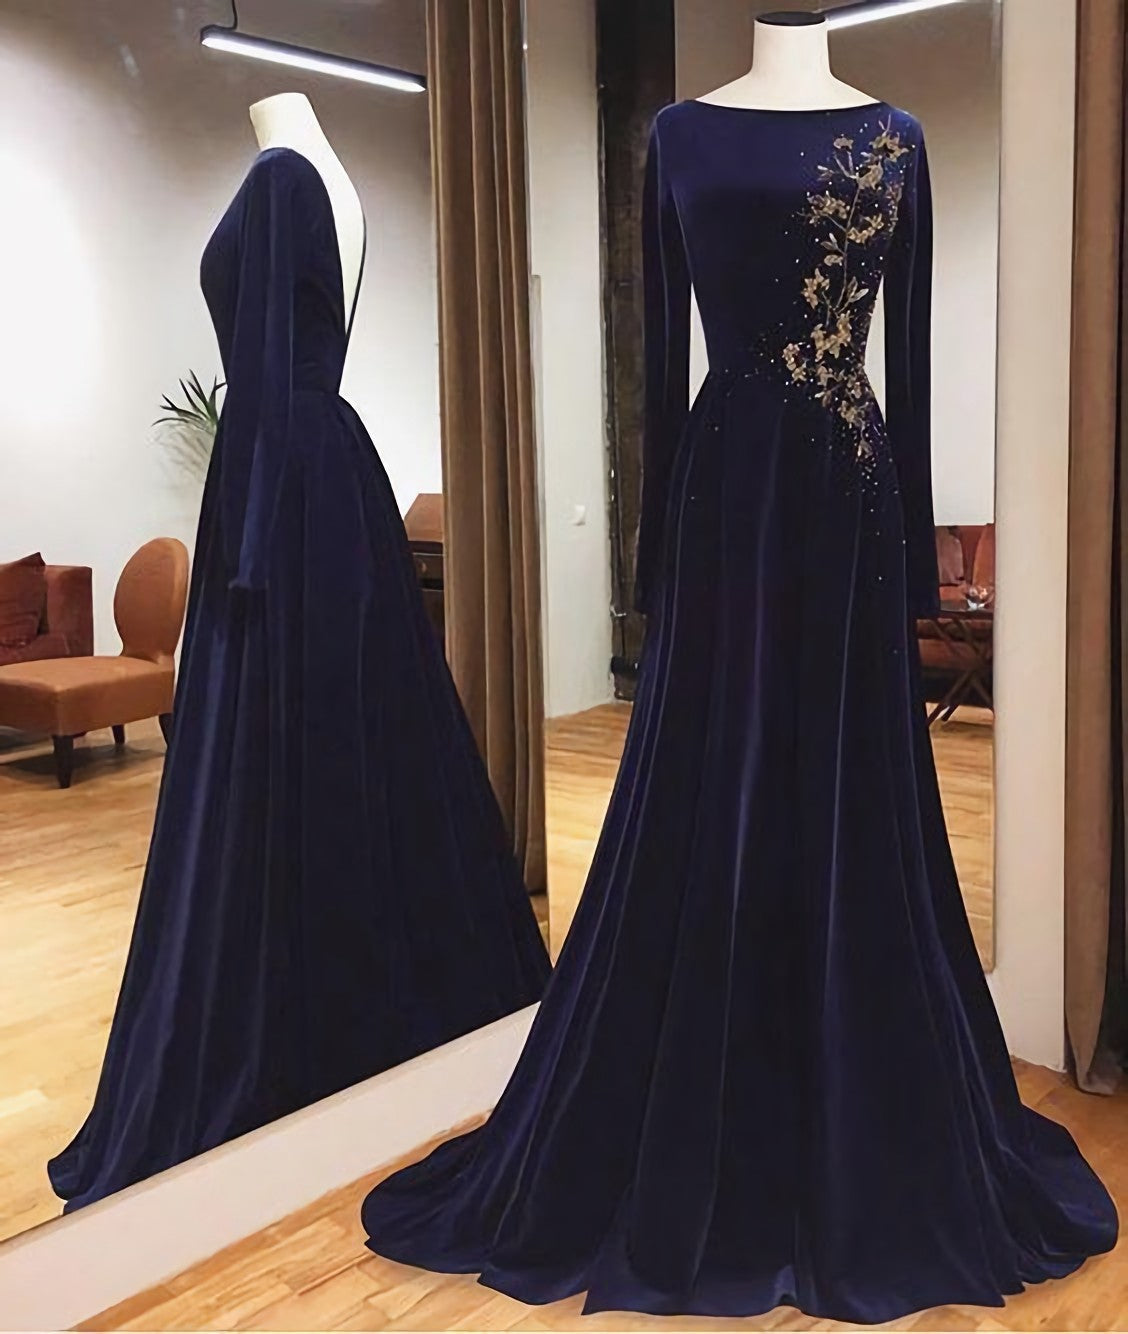 Blue Long Sleeves Charming Corset Prom Dress outfits, Prom Dresses For Girls